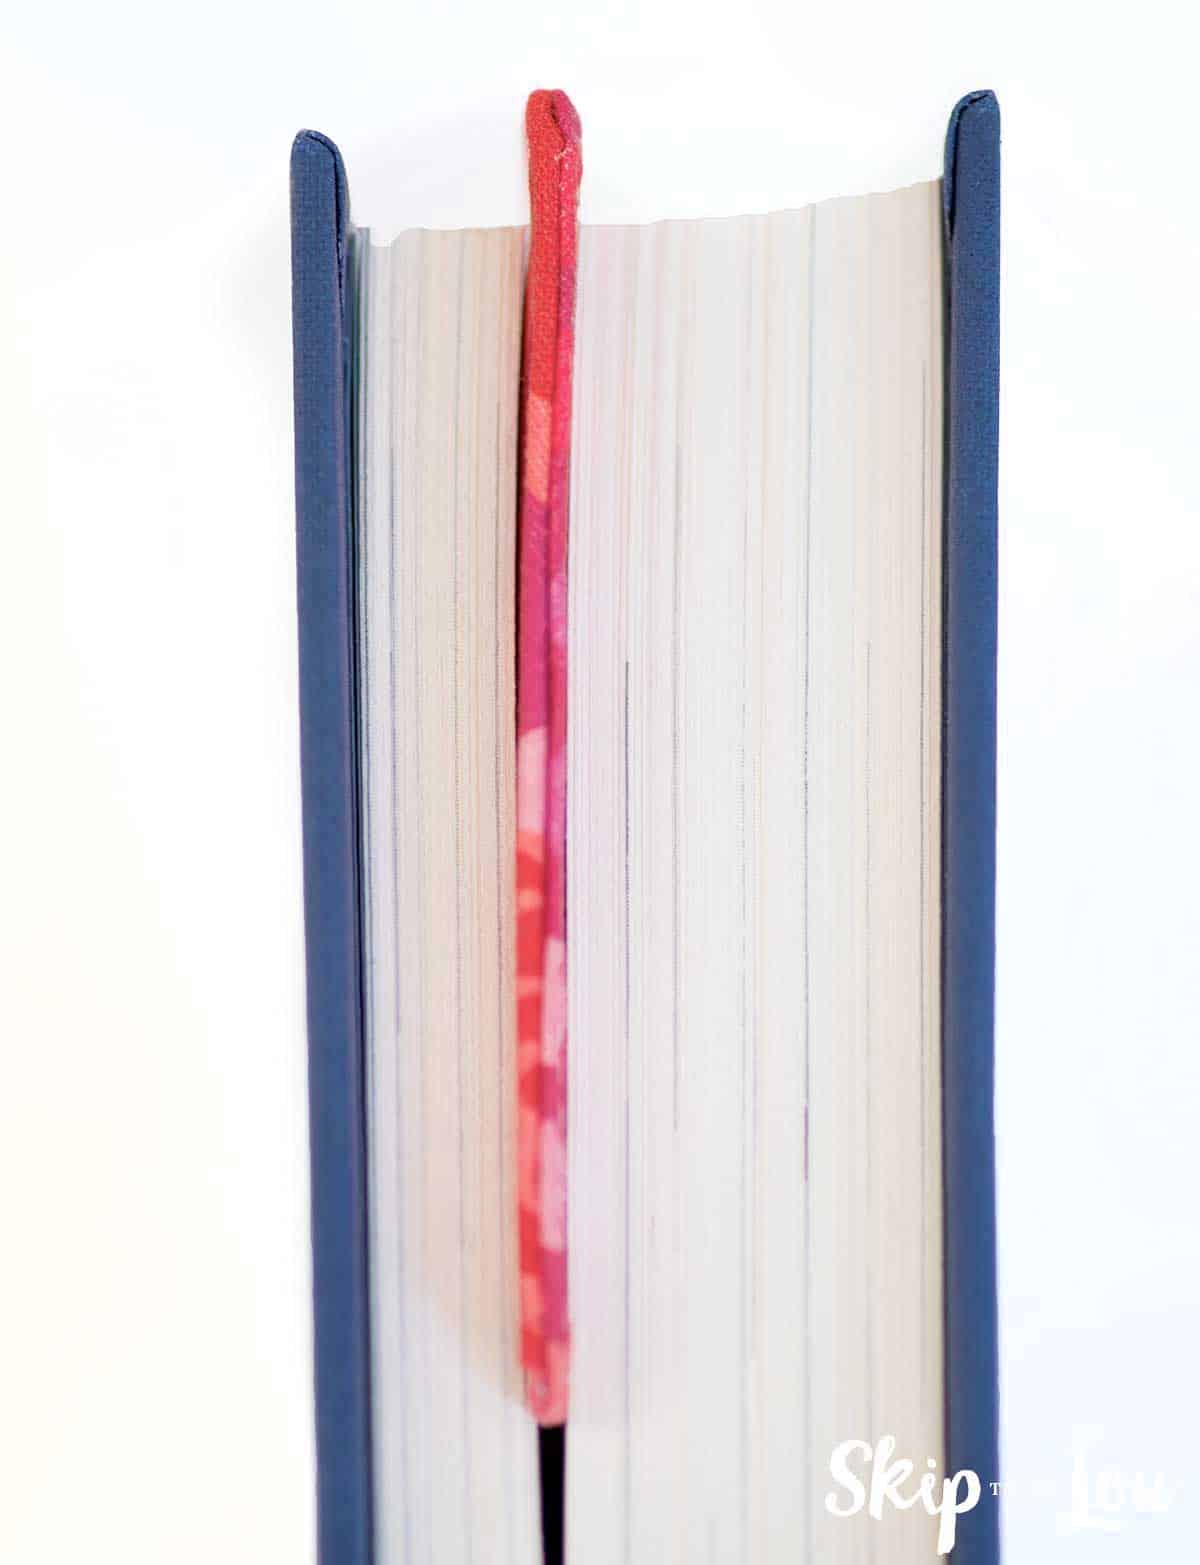 bookmark placed inside a book